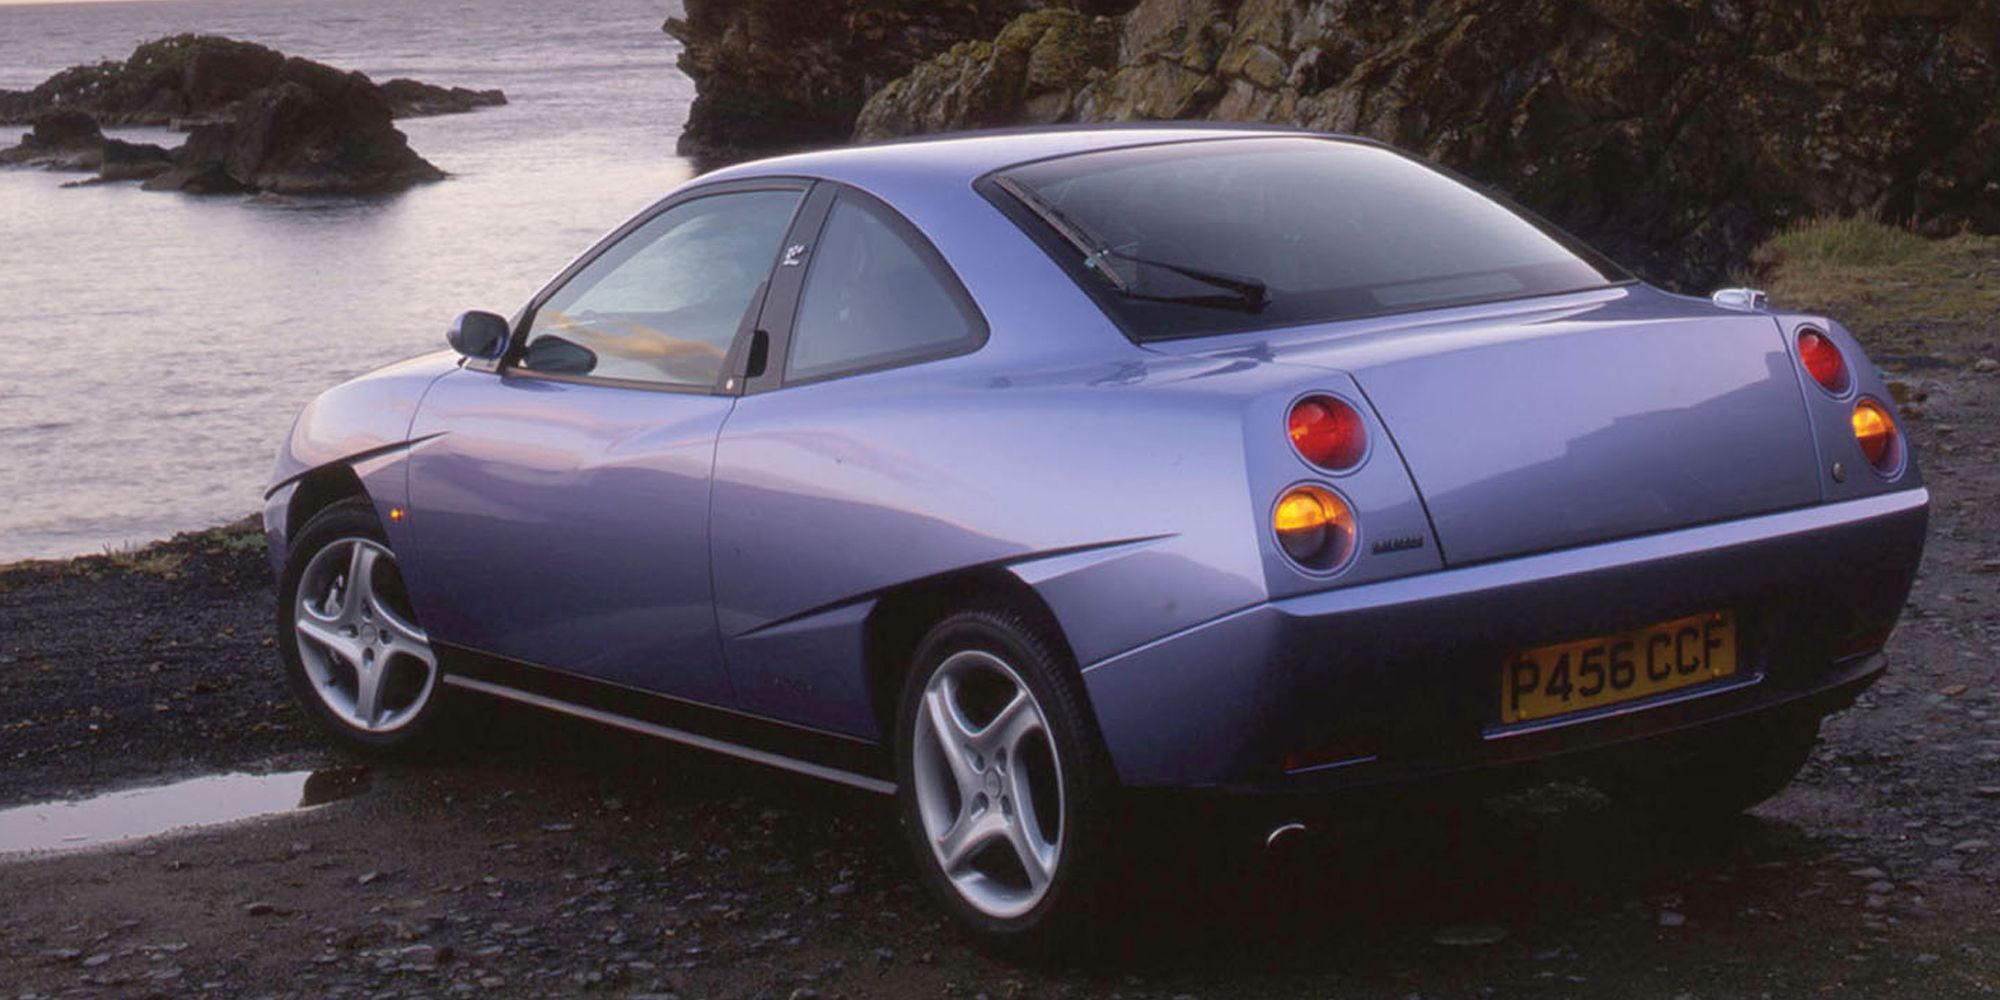 Rear 3/4 view of the Fiat Coupe